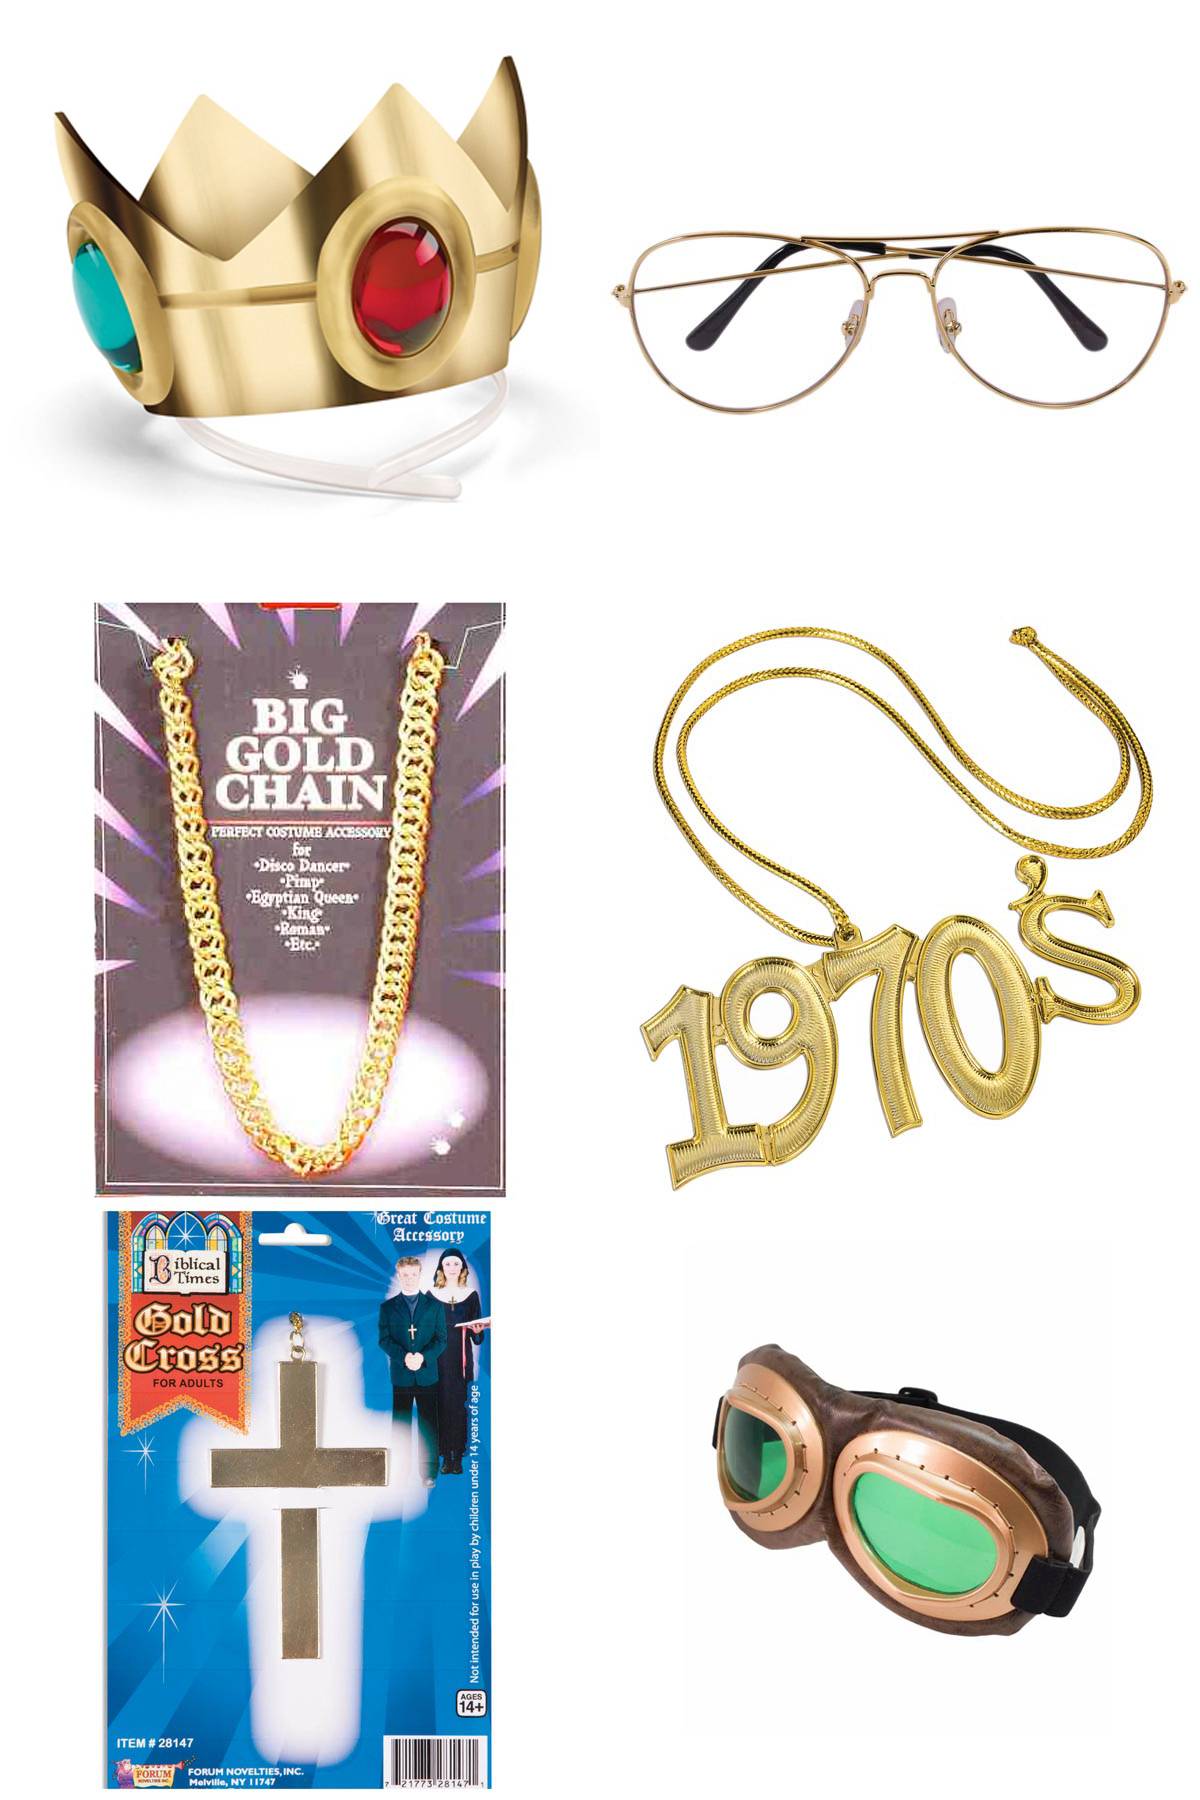 costume-accessories-jewelry-and-glasses-main-link